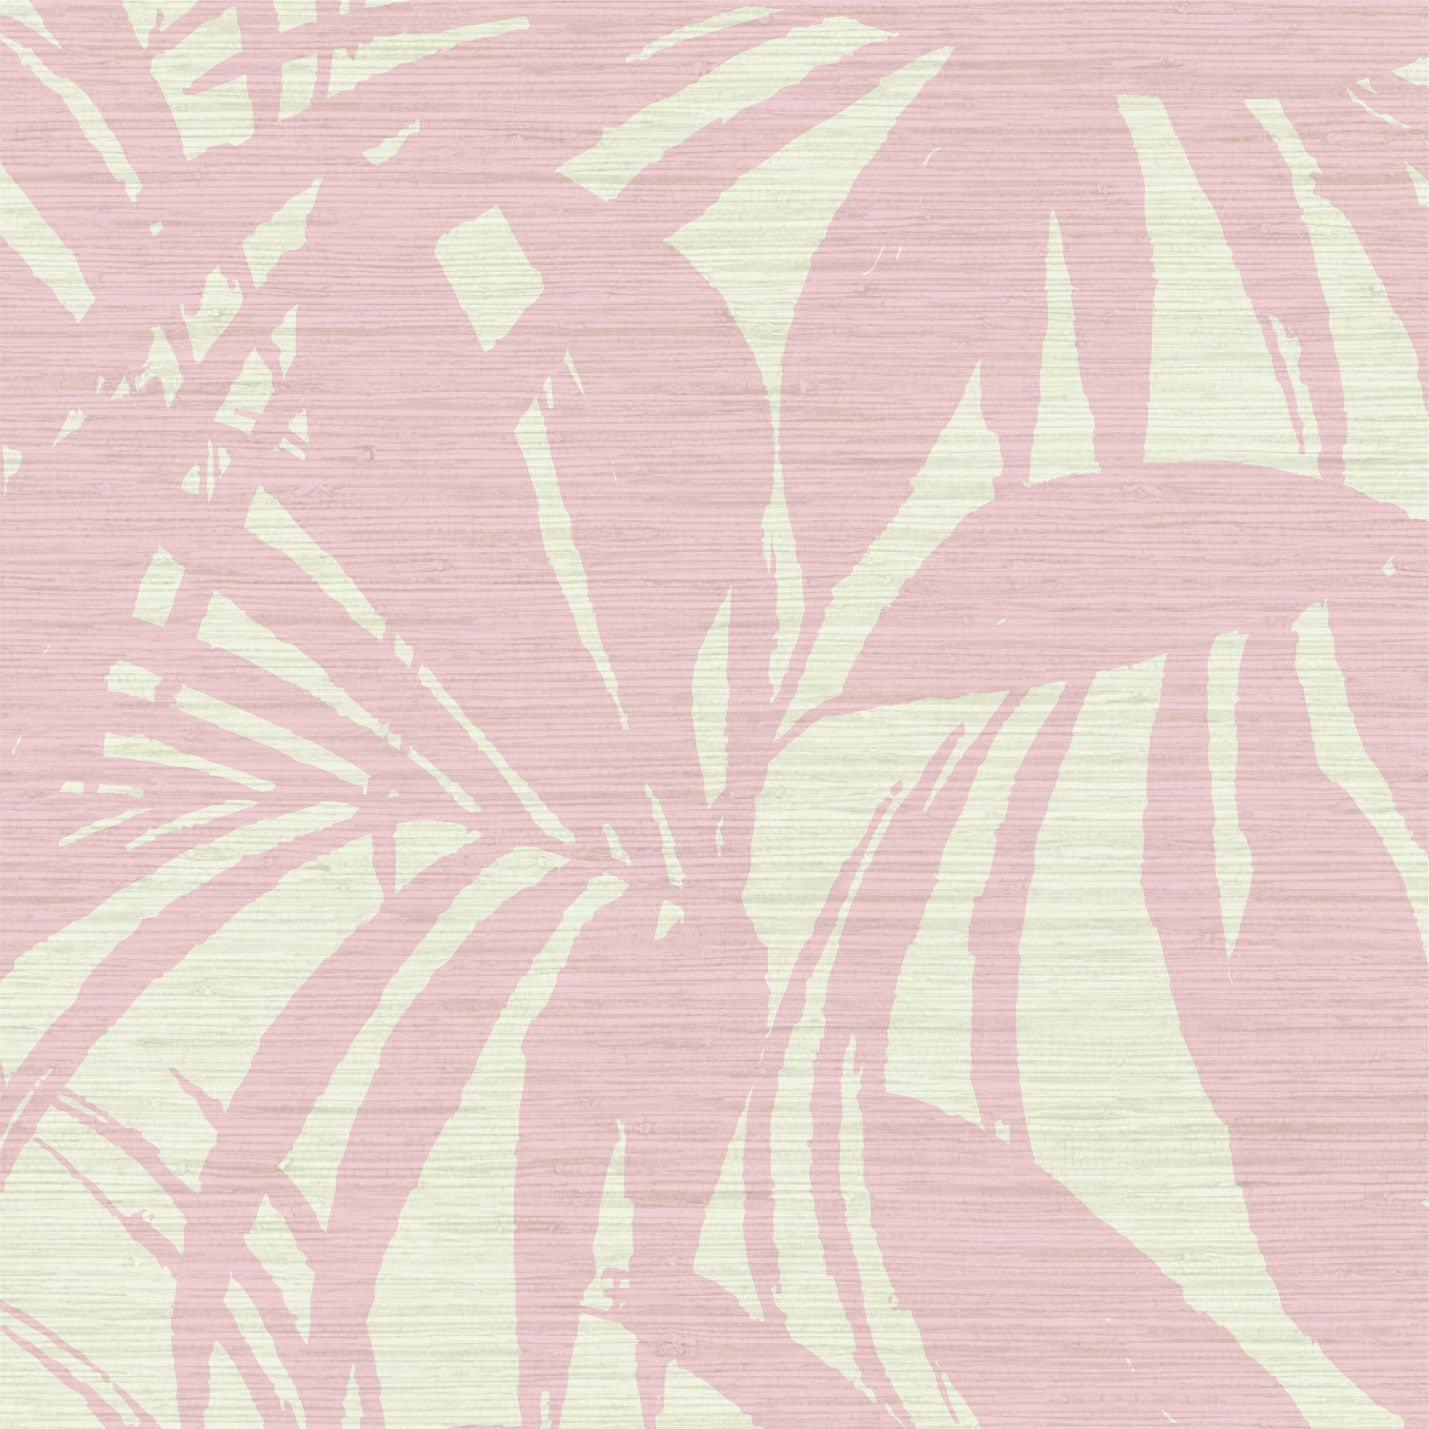 printed grasscloth wallpaper oversize tropical leaf Natural Textured Eco-Friendly Non-toxic High-quality  Sustainable practices Sustainability Interior Design Wall covering Bold retro chic custom jungle garden botanical Seaside Coastal Seashore Waterfront Vacation home styling Retreat Relaxed beach vibes Beach cottage Shoreline Oceanfront white pink baby bubblegum